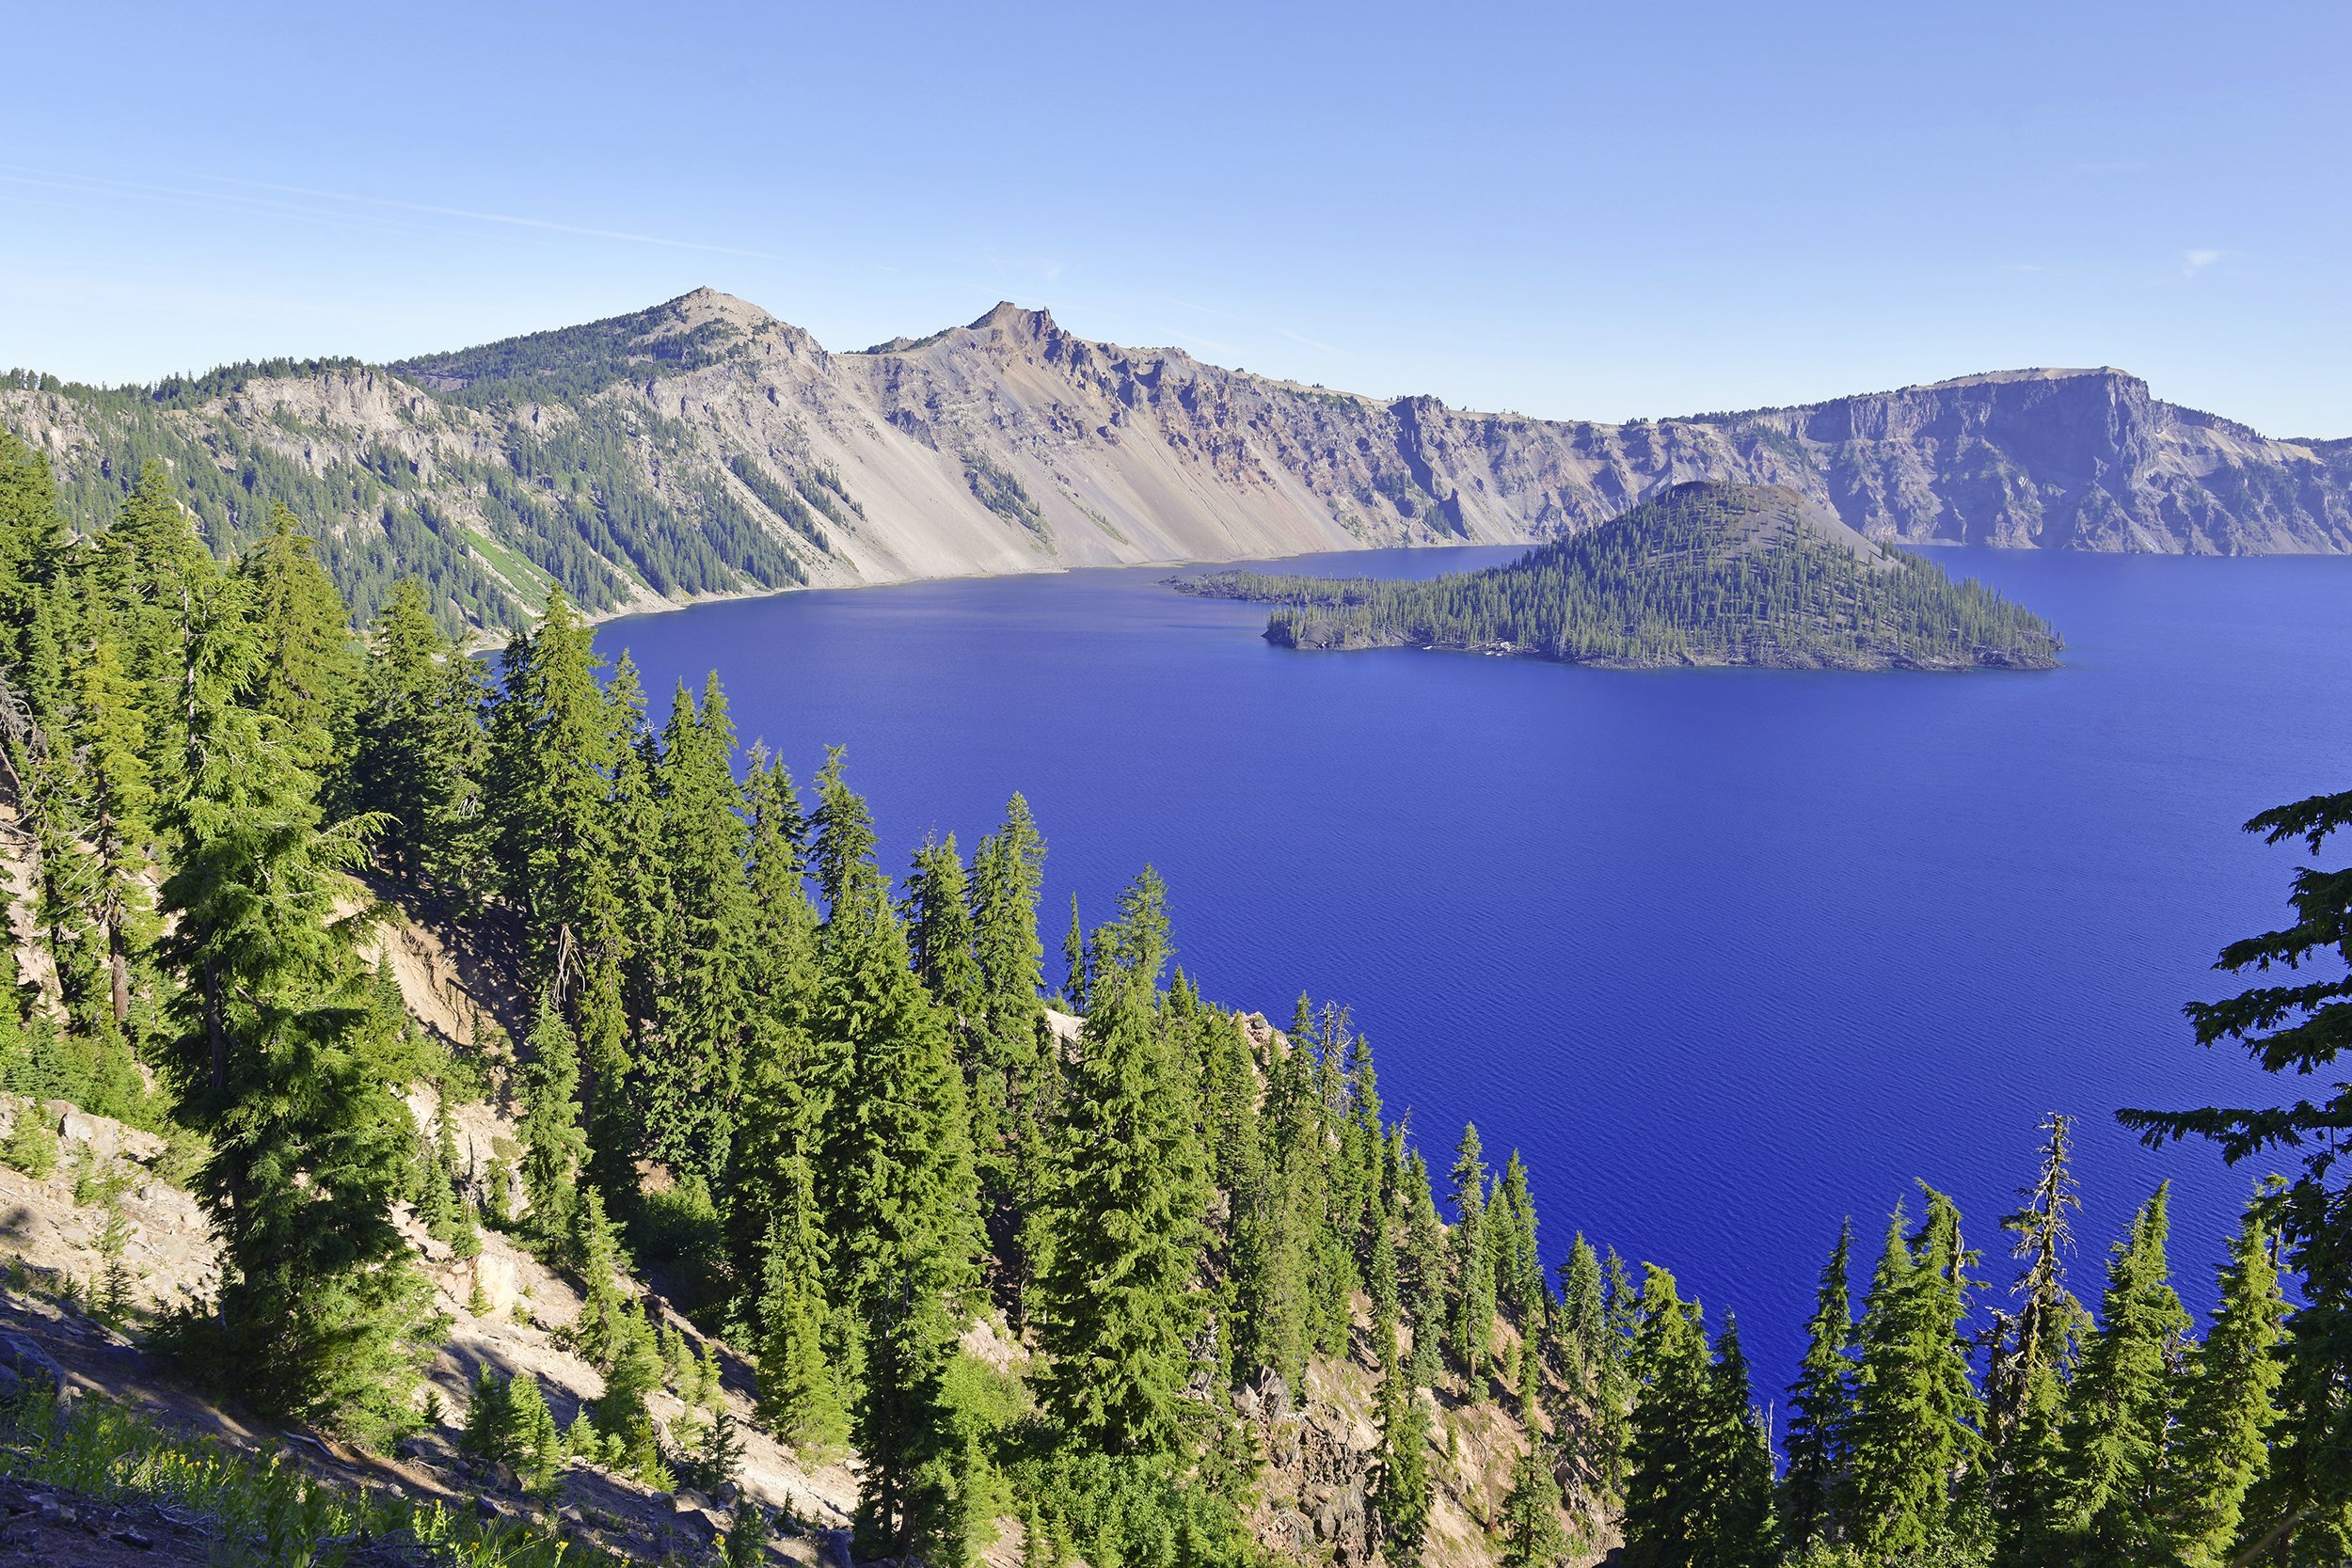 <p>Crater Lake National Park is home to the deepest lake in the United States. The lake fills the caldera of a dormant volcano, and visitors can drive, hike, take a trolley, or ride a bike along the rim to peer into the lake from different vantage points. Steep cliffs limit access to the water, but visitors can hike several trails and take a boat tour around the lake's perimeter or to Wizard Island, a volcanic cinder cone that rises about 760 feet out of the water.</p>